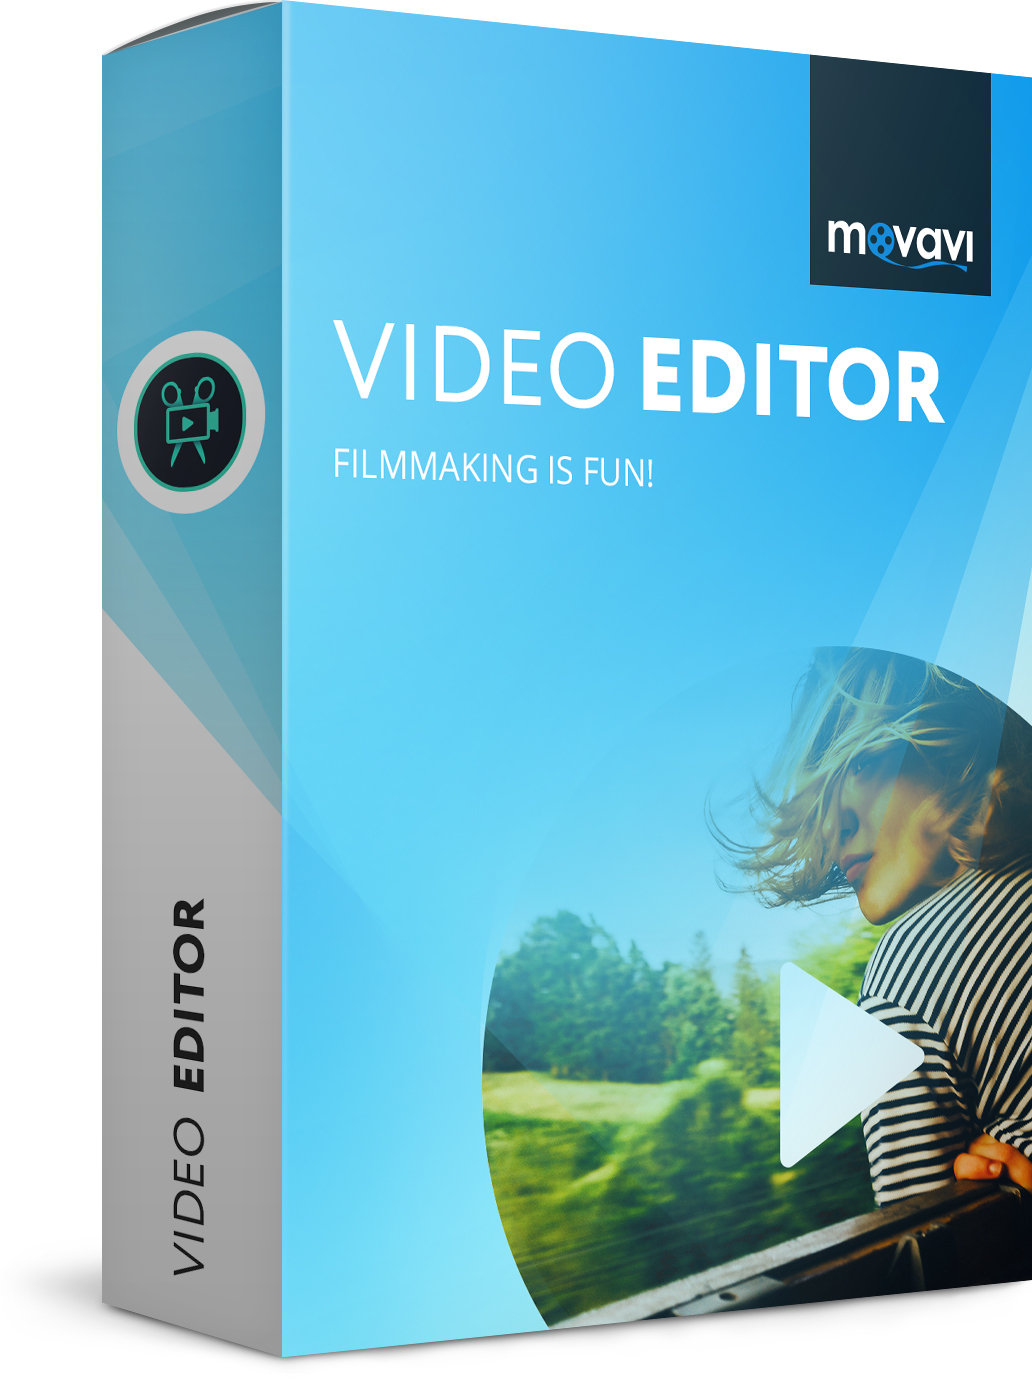 Combining Videos with Movavi Video Editor